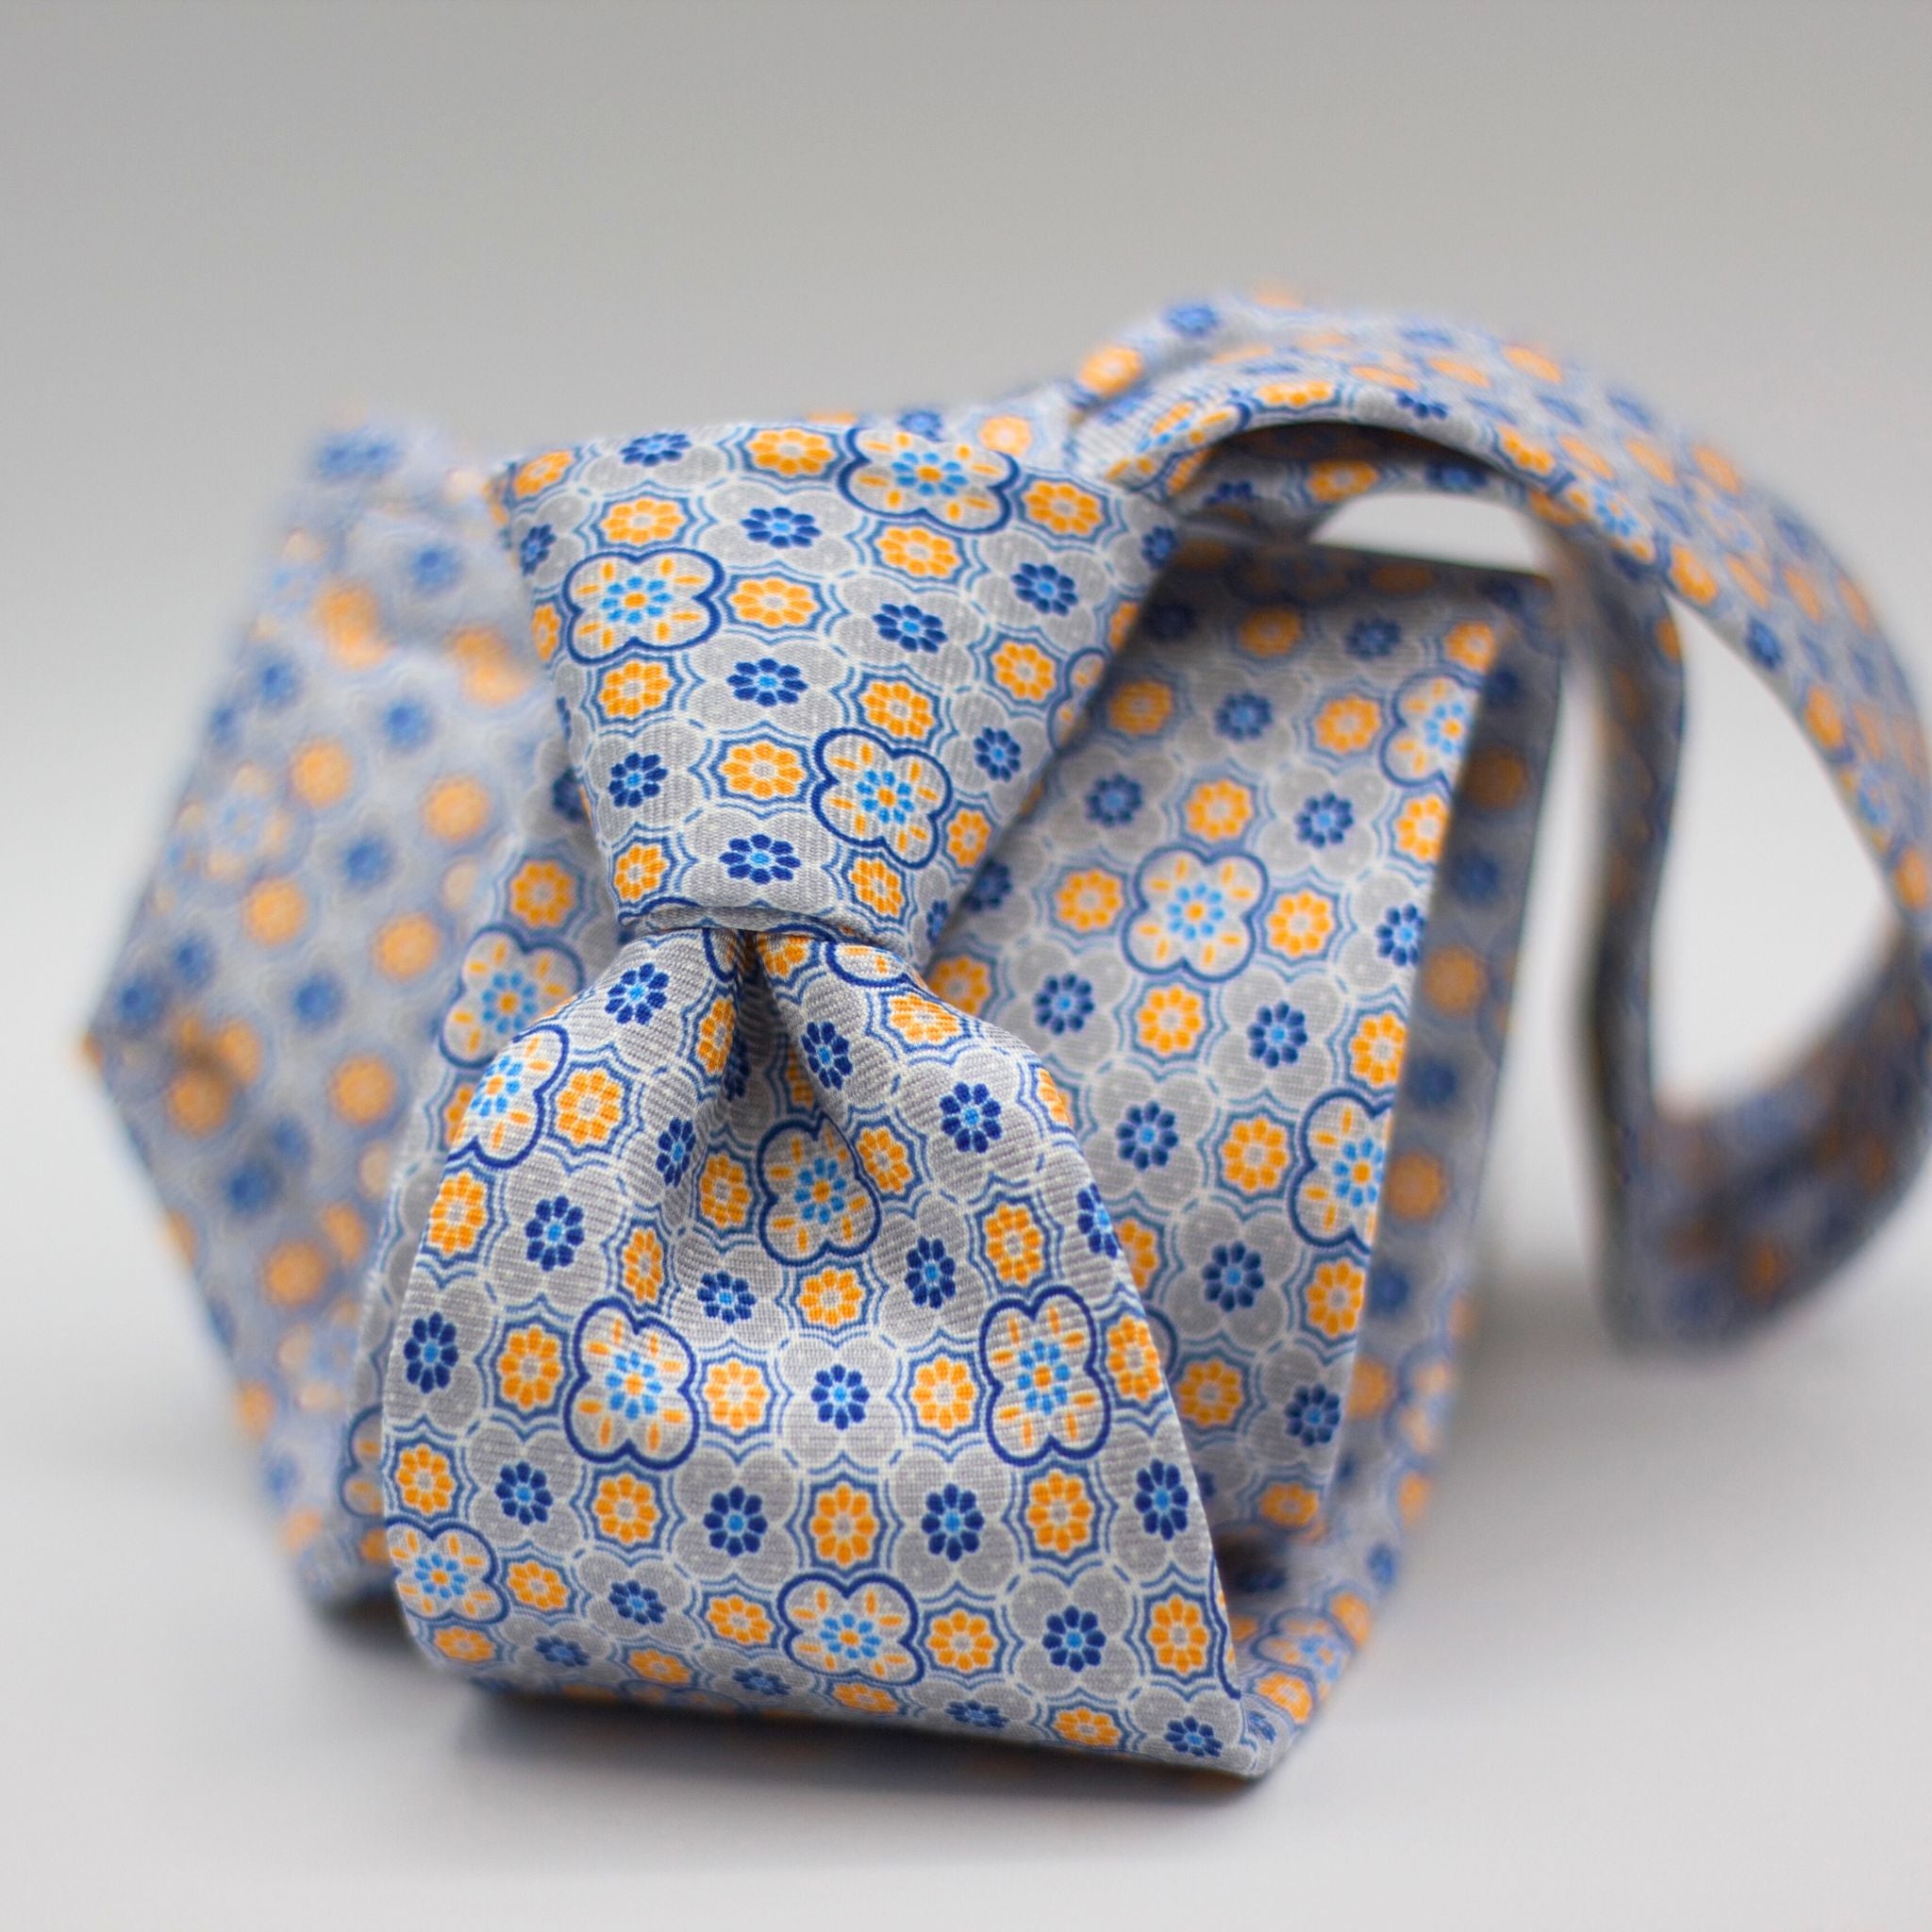 Cruciani & Bella 100% Silk Printed Self-Tipped White, yellow and blue navy motif Tie Handmade in Rome, Italy. 8 cm x 150 cm